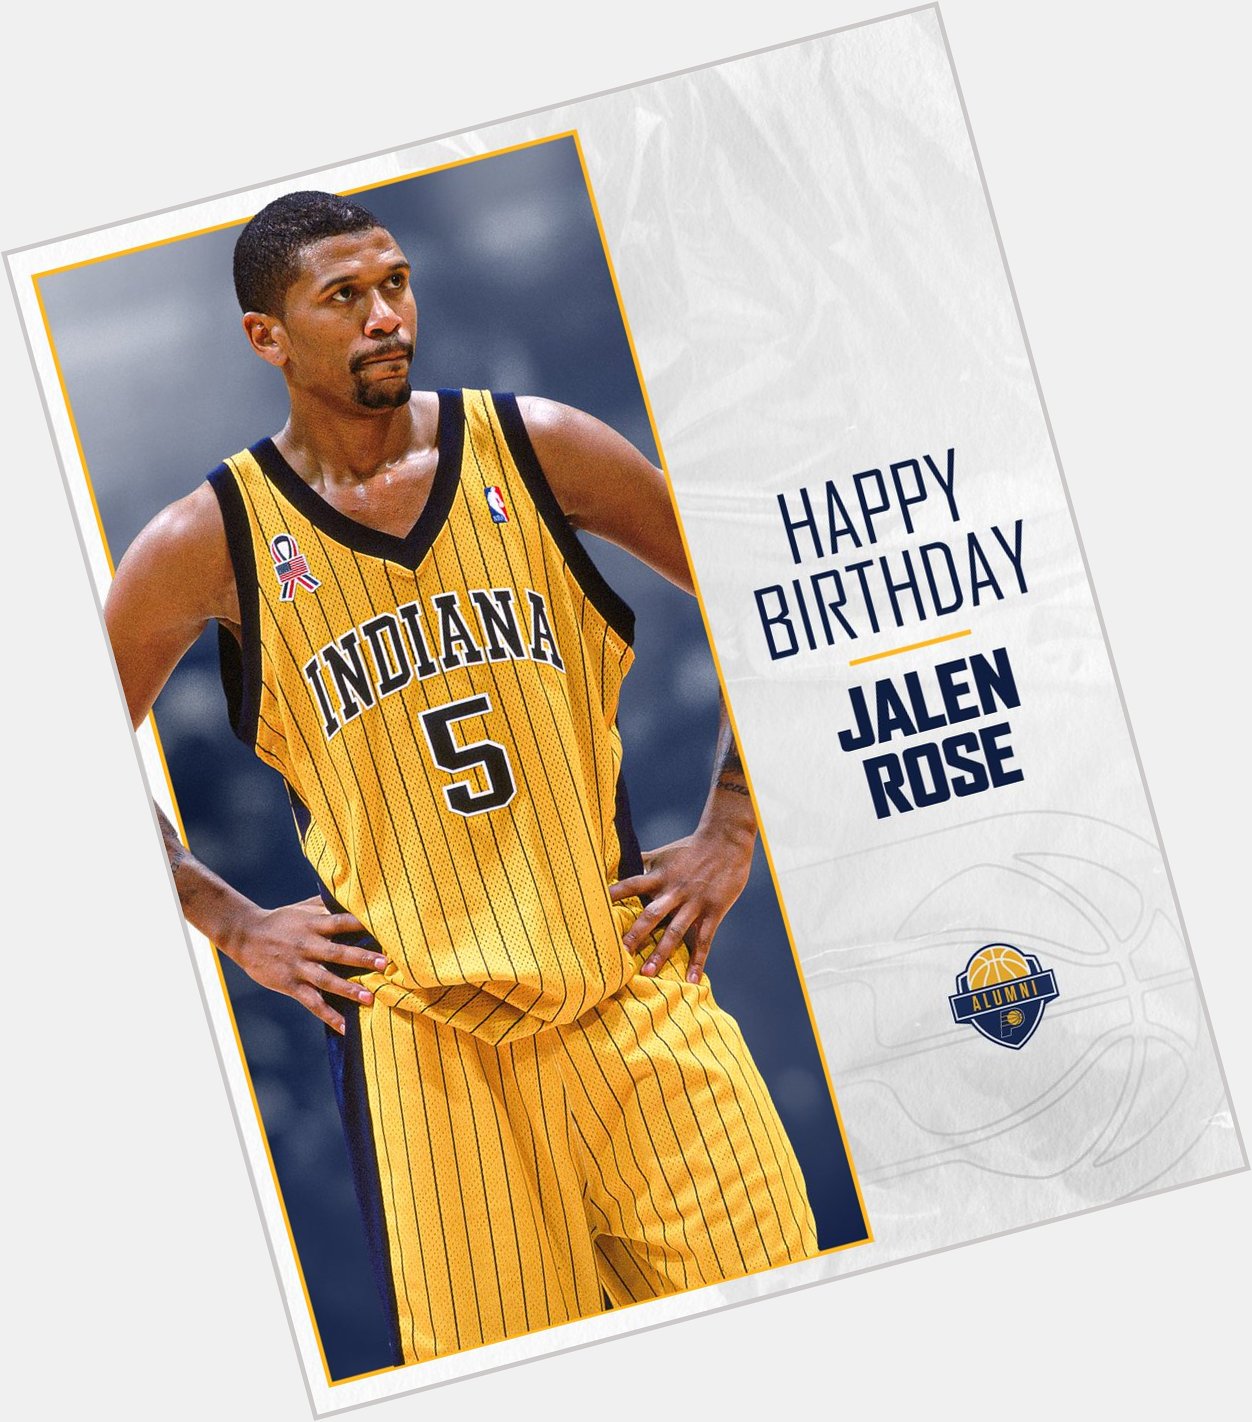 Happy birthday to the one and only Jalen Rose! 